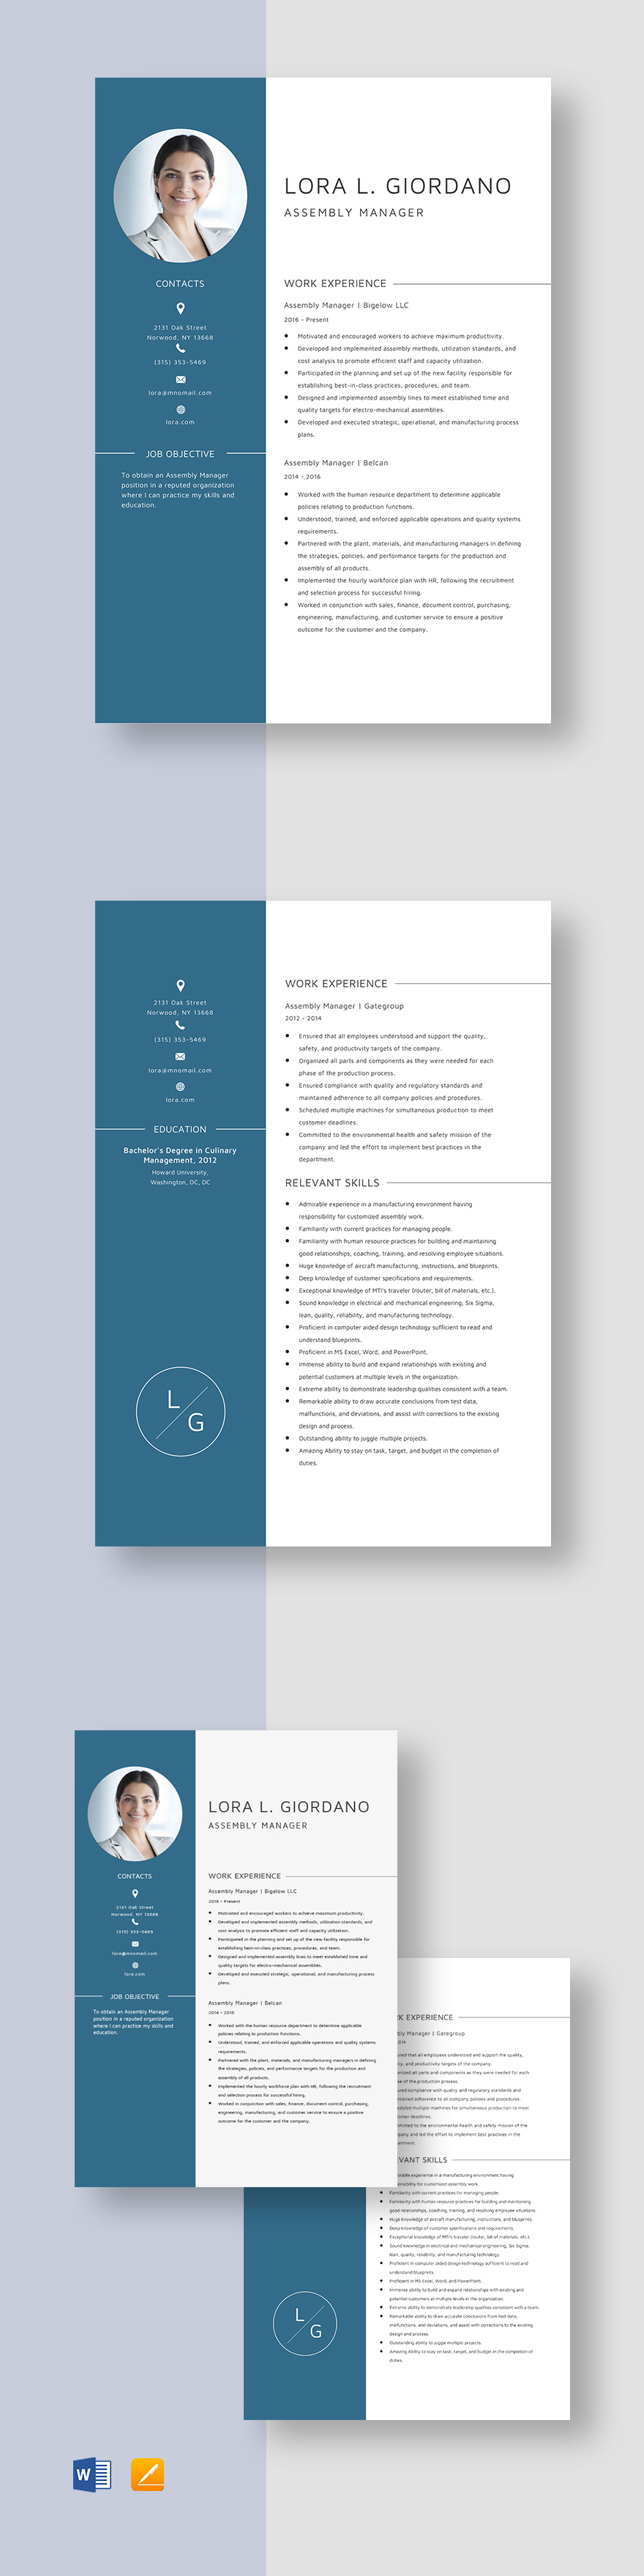 Assembly Manager Resume Template